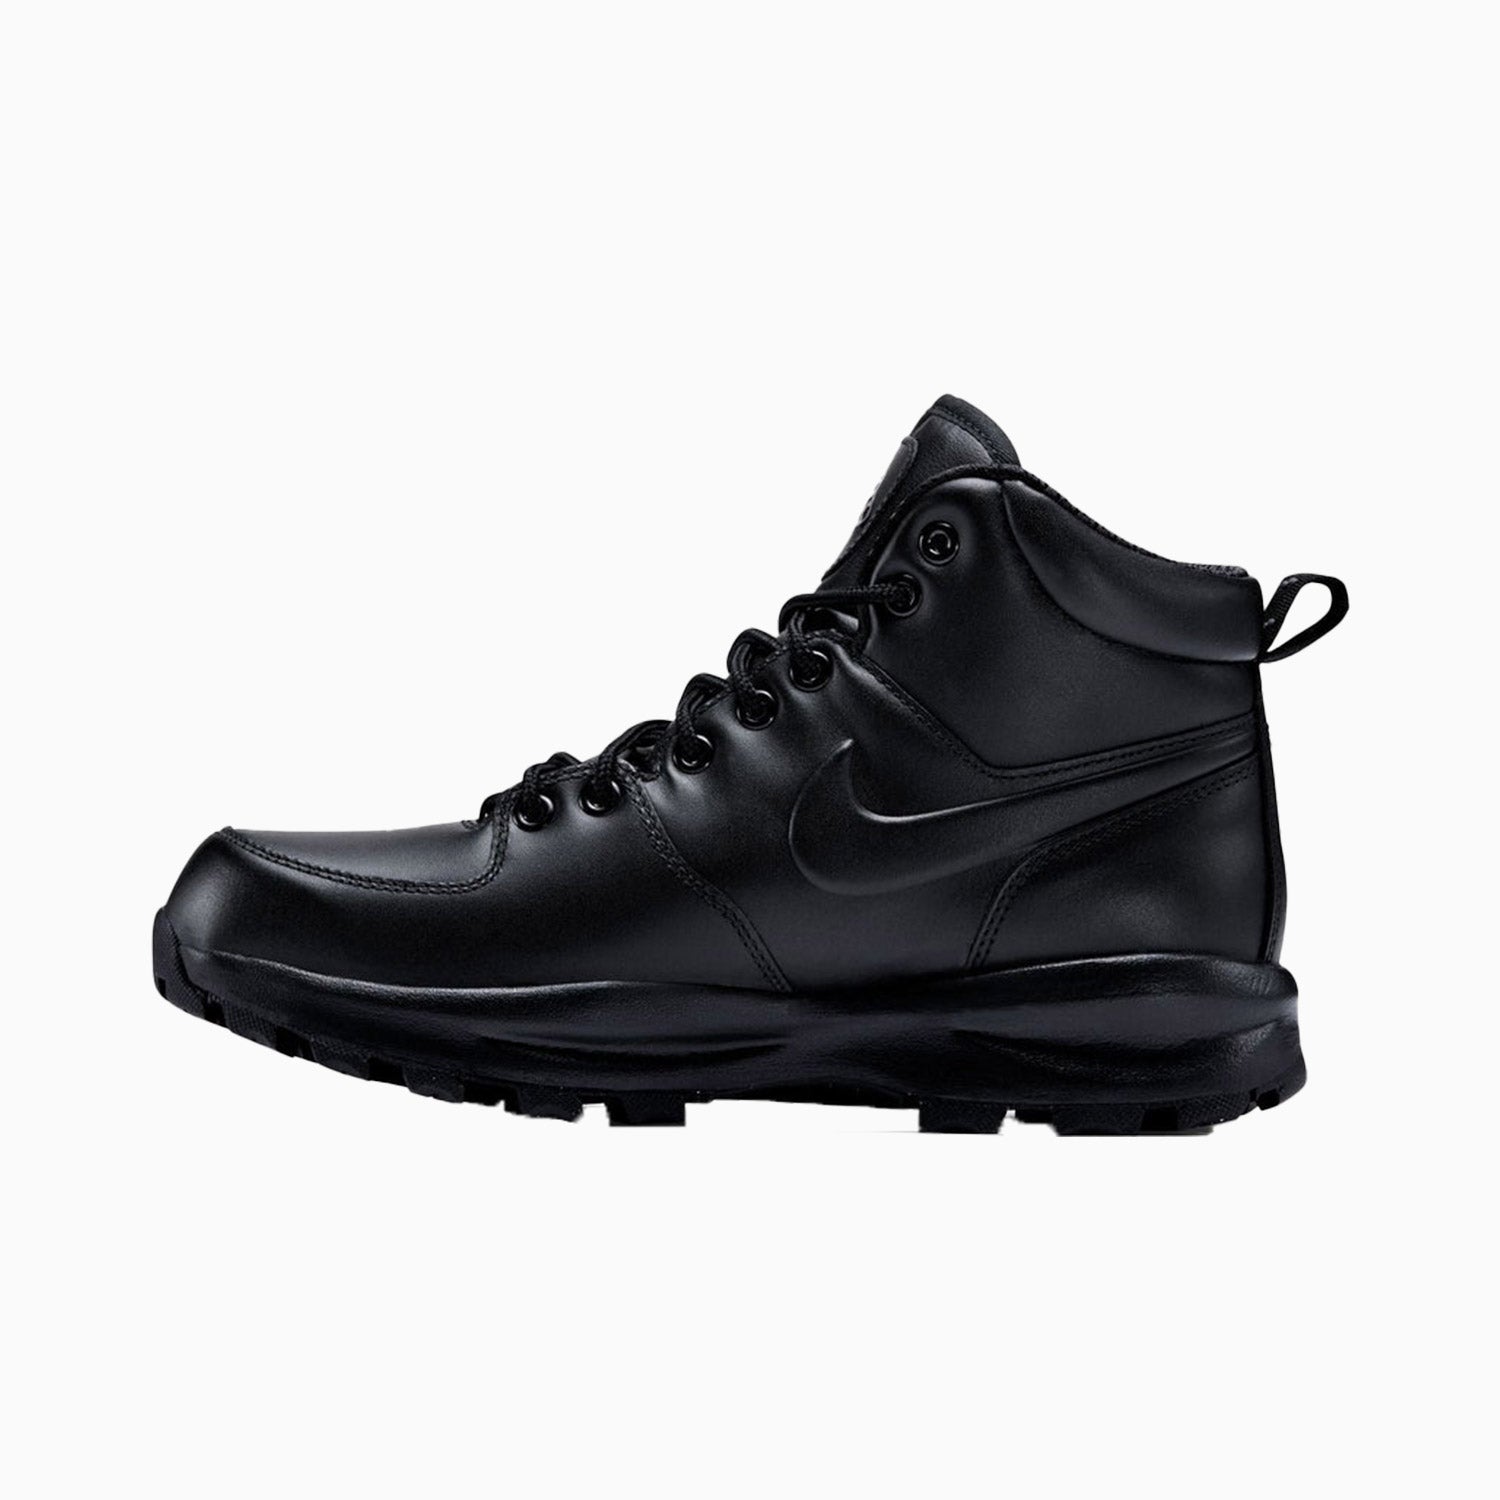 nike-mens-manao-leather-boot-454350-003